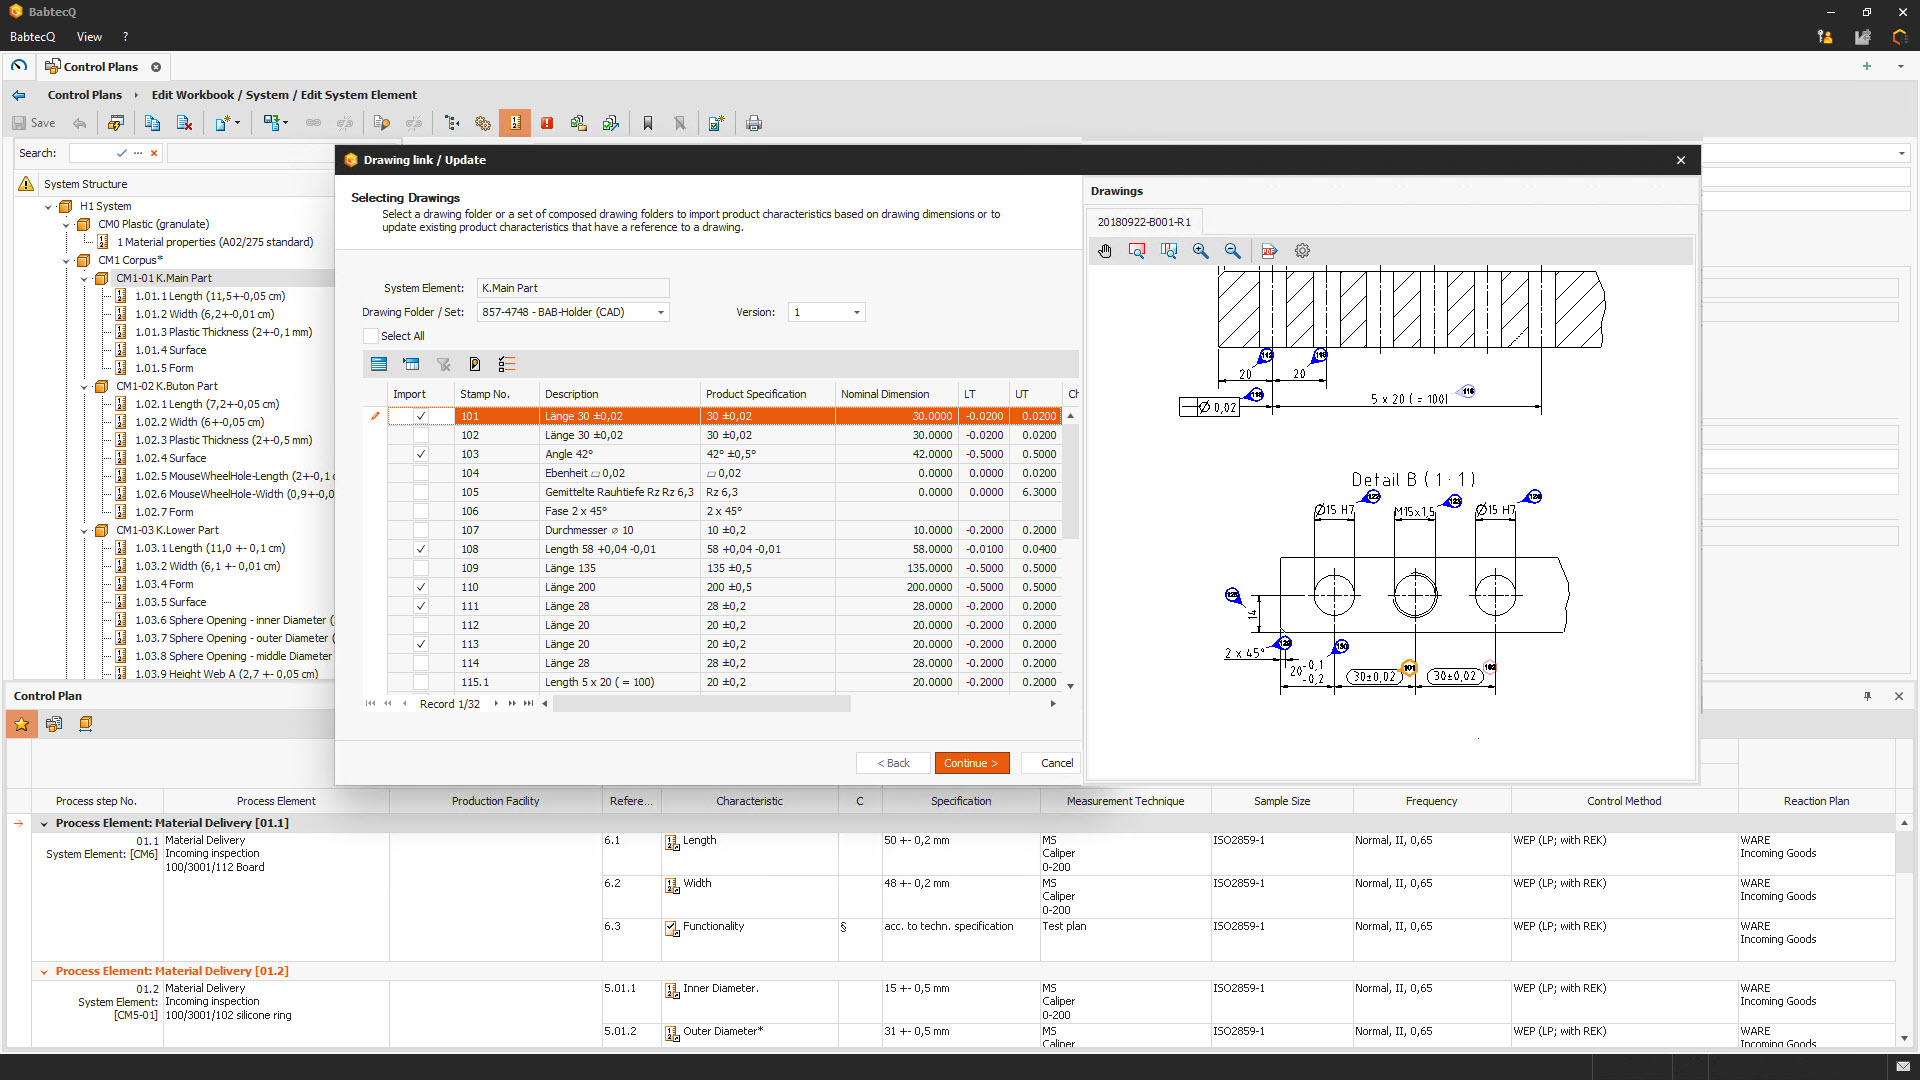 Control-Plan in the QM Software BabtecQ: CAD Integration